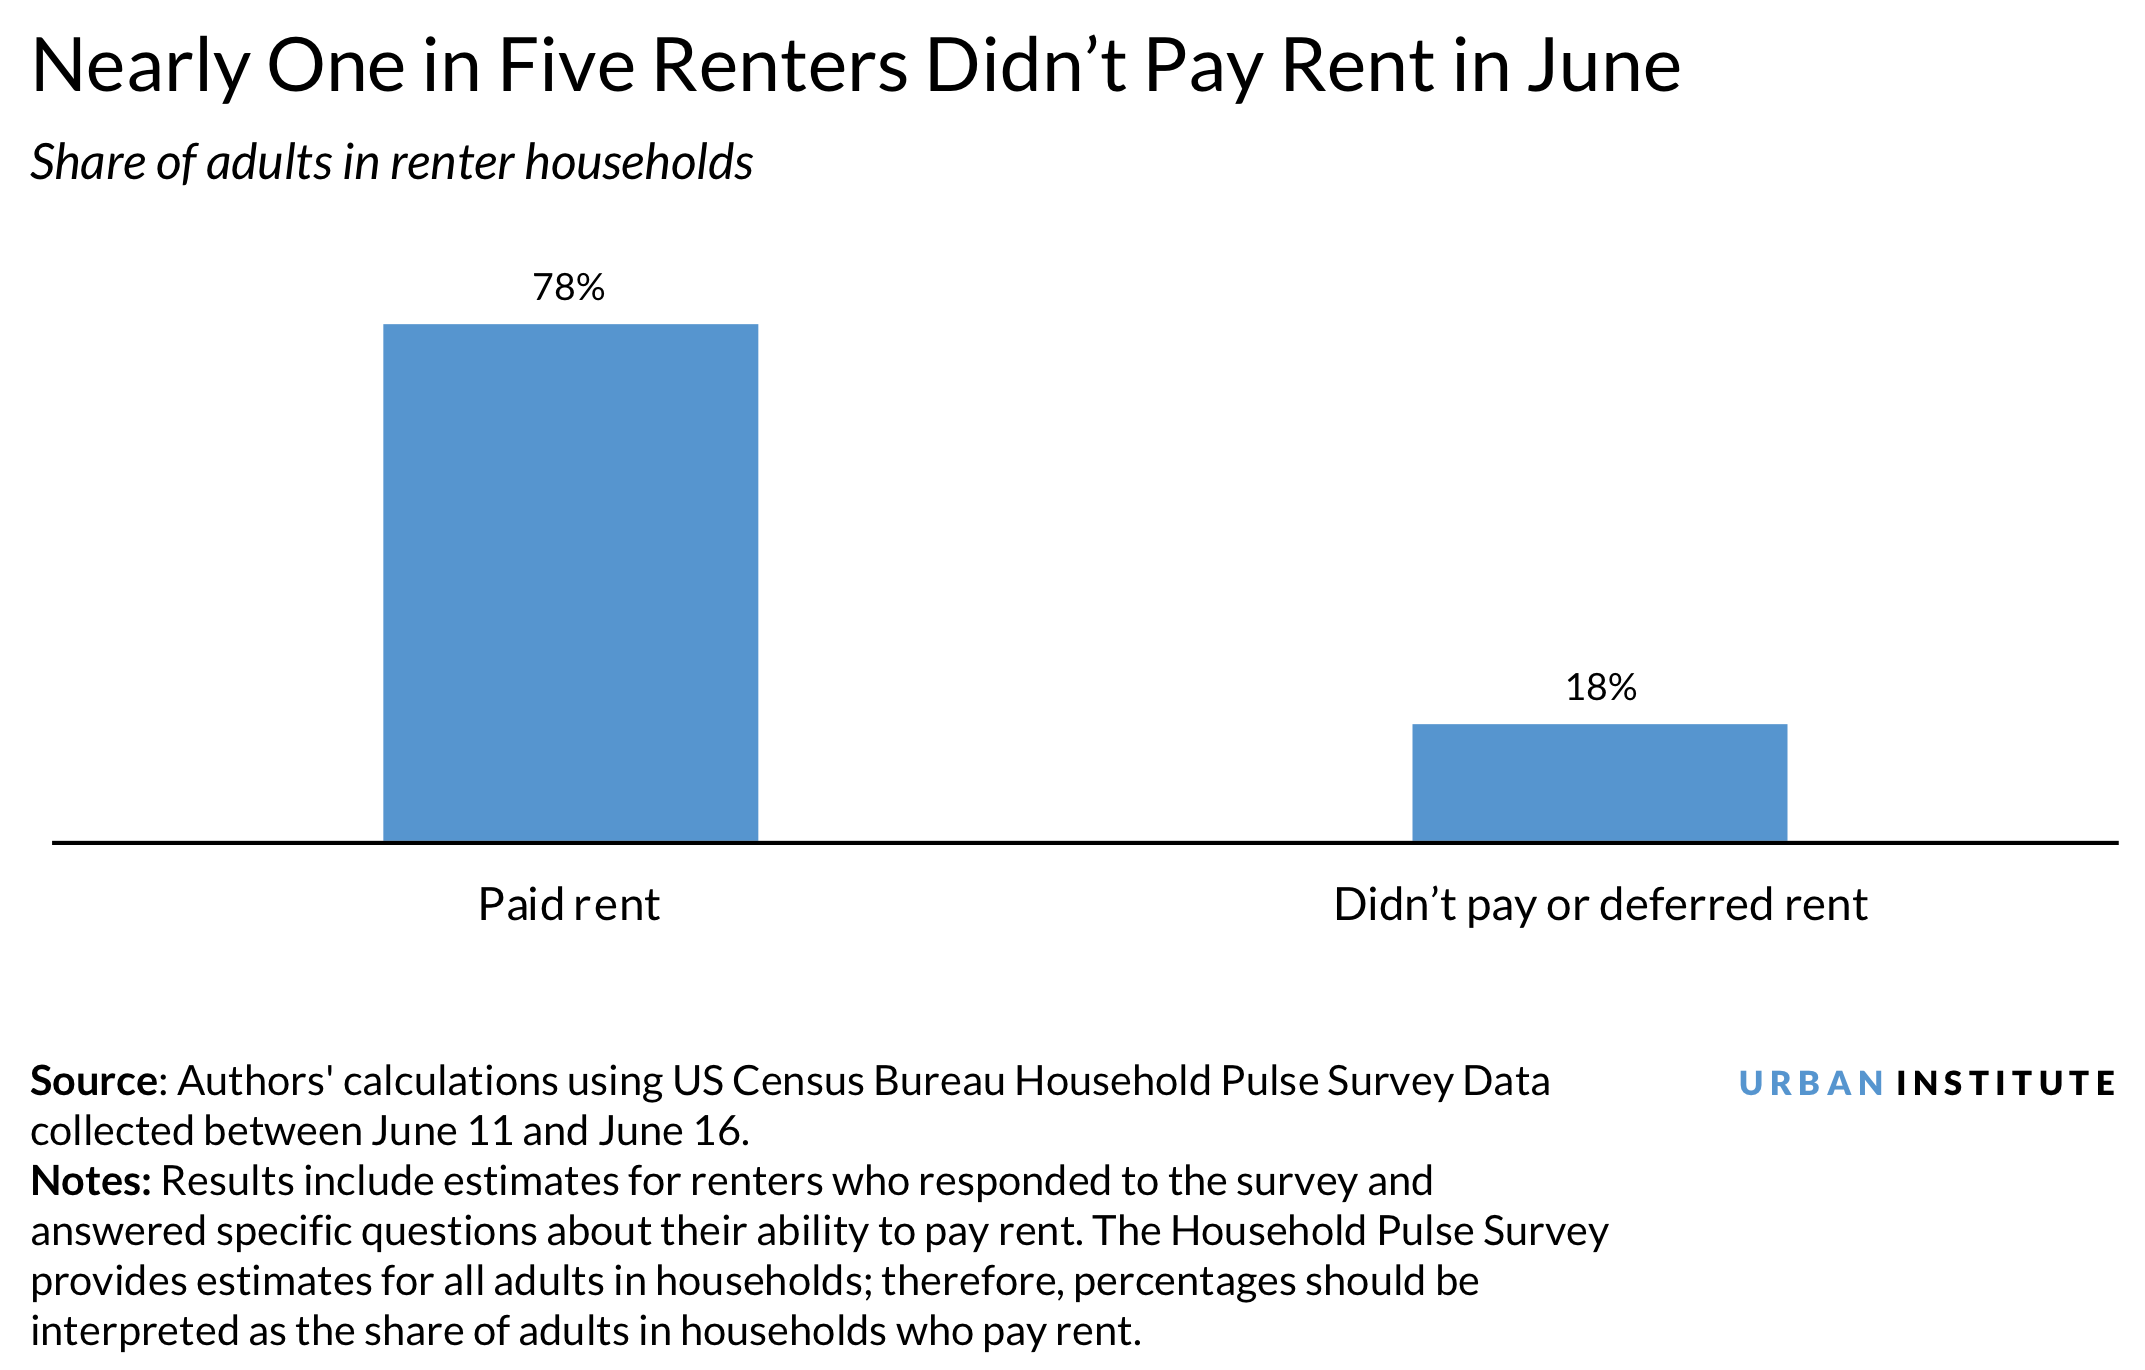 Share of renter households that didn't pay June rent